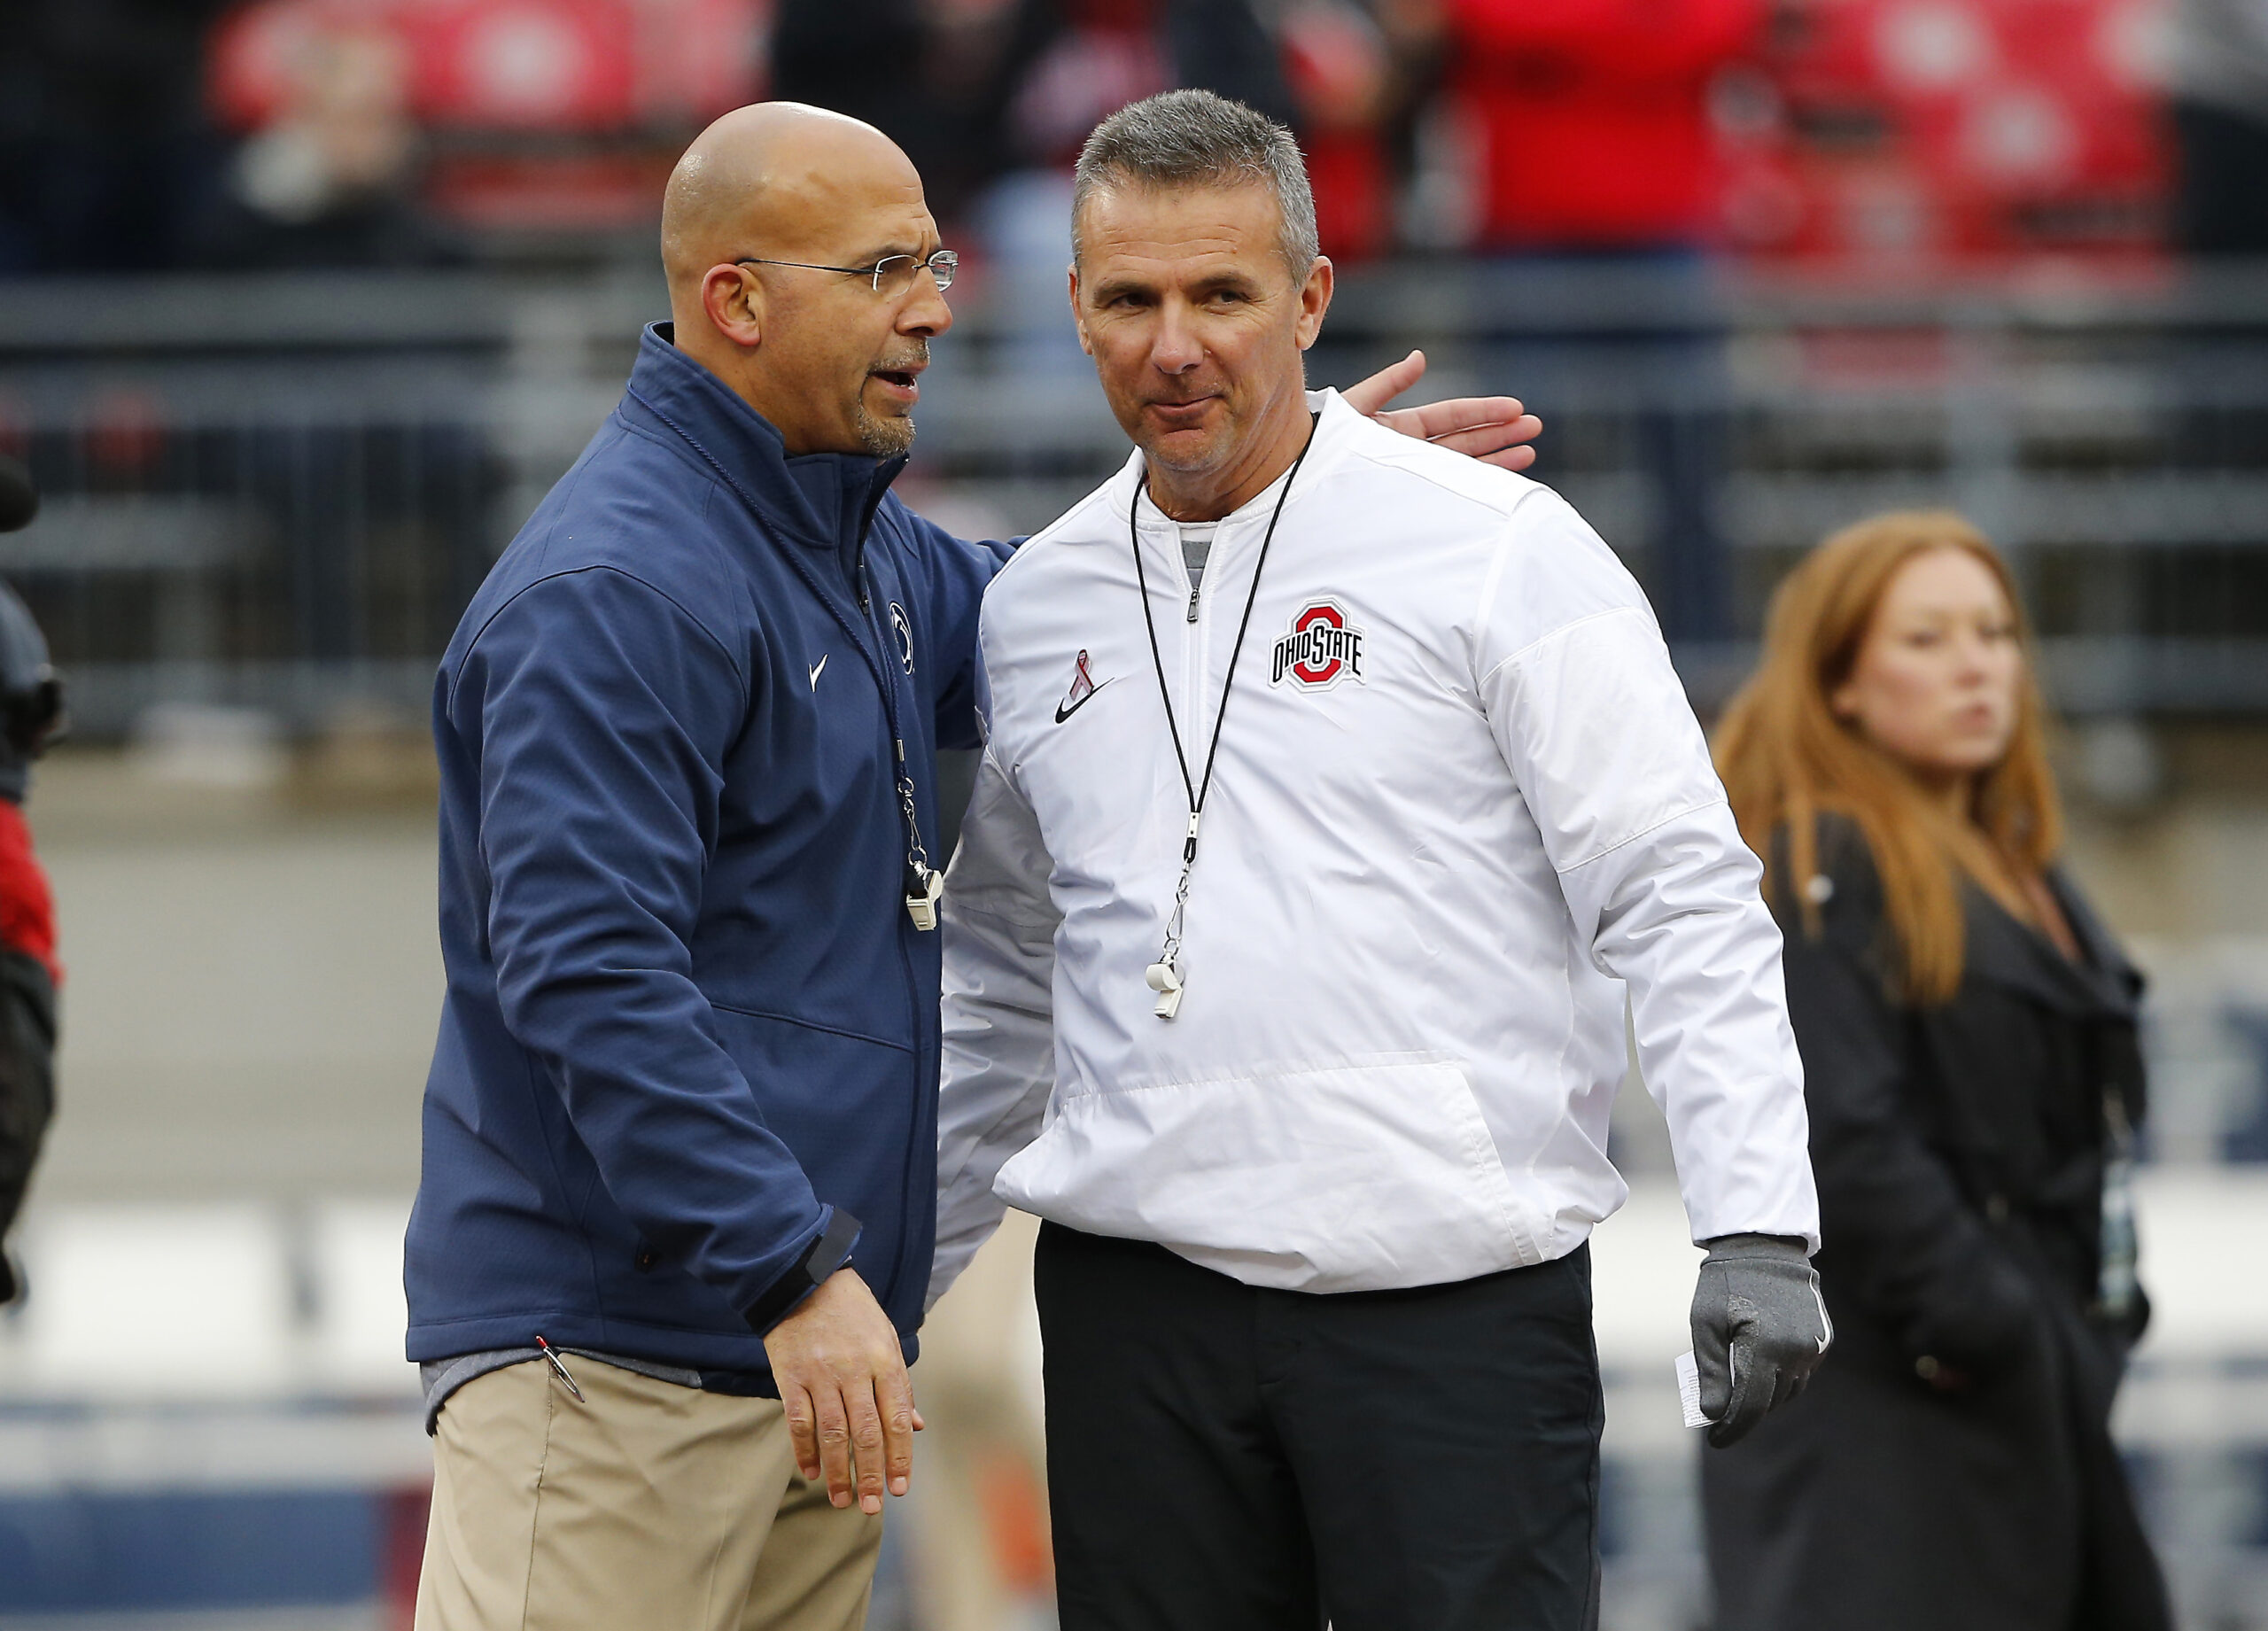 Urban Meyer comments on Penn State football